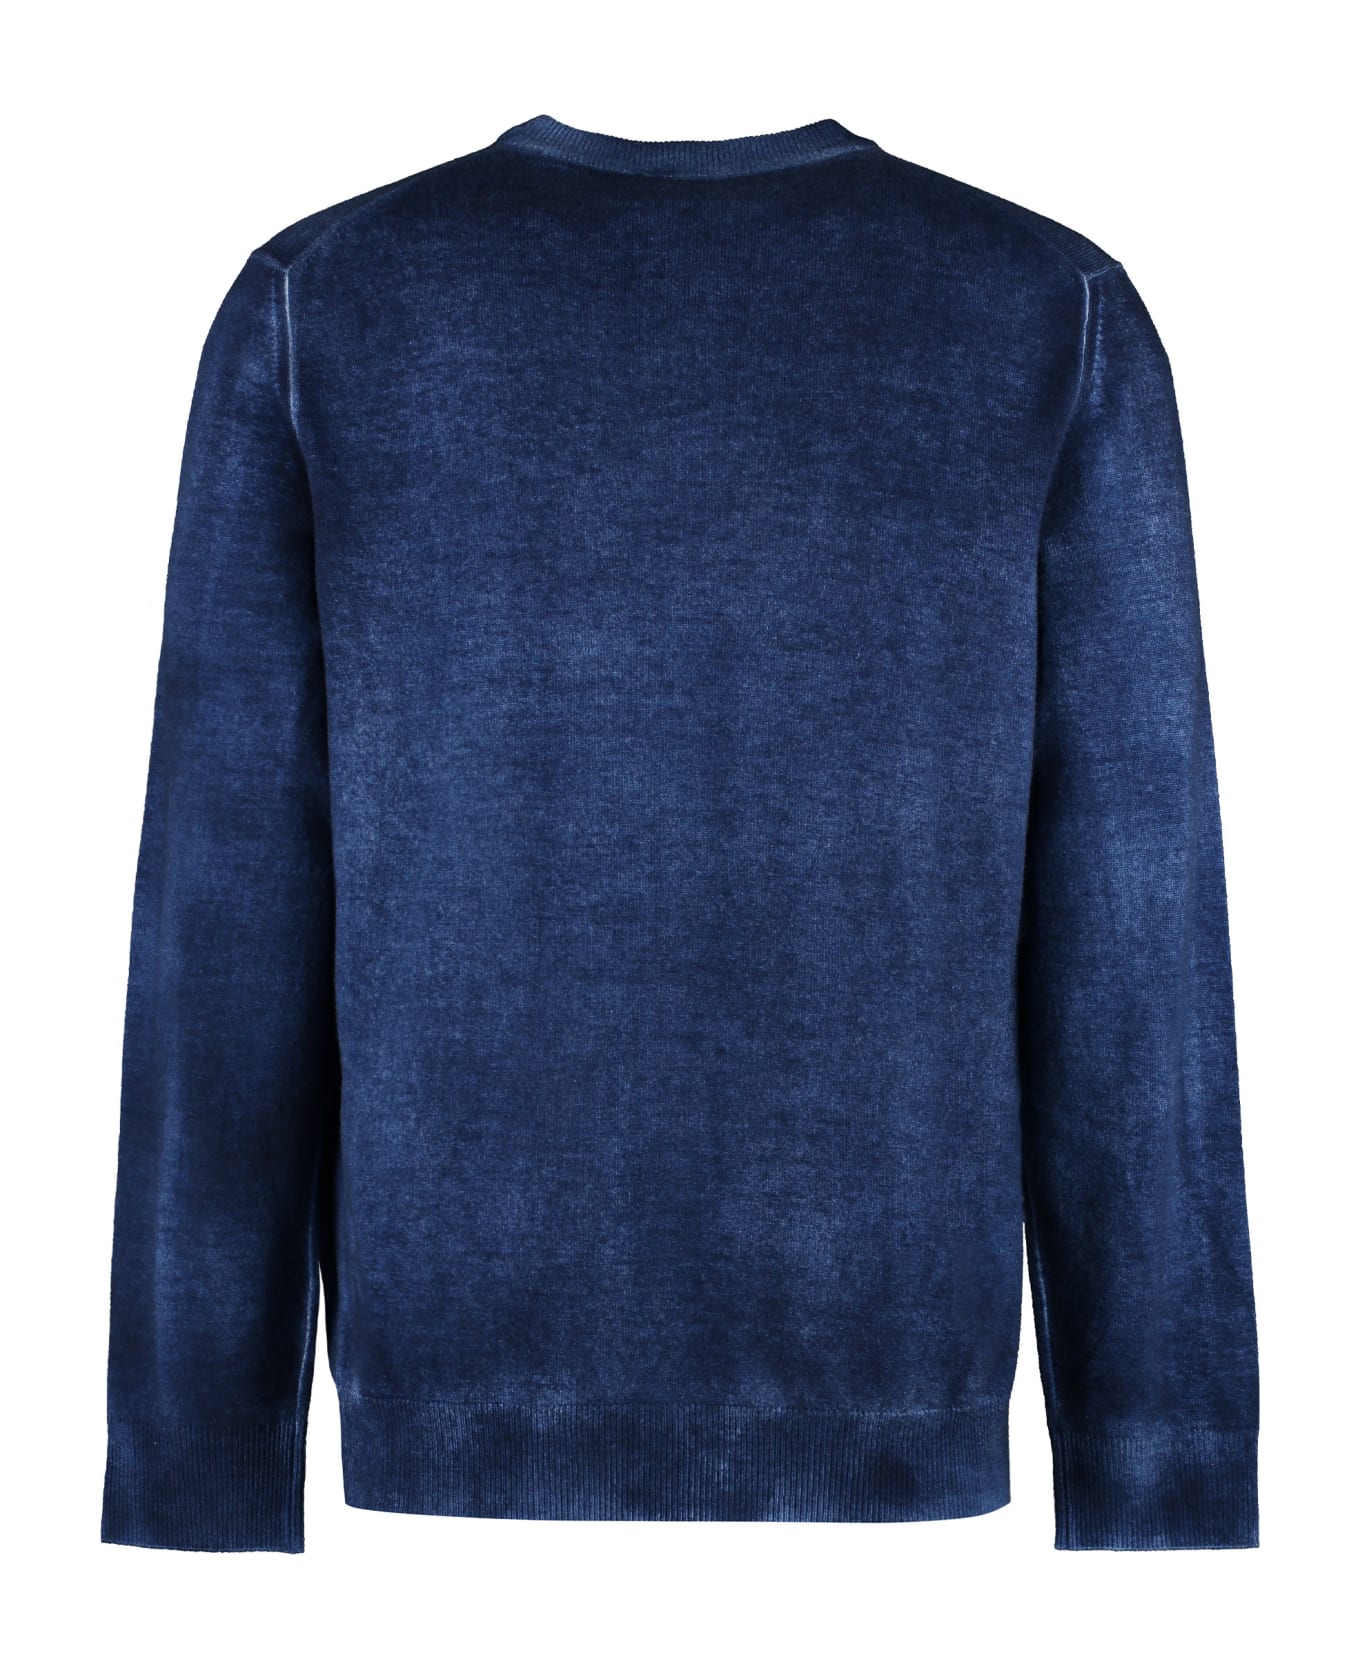 Roberto Collina Wool And Cashmere Sweater - blue フリース